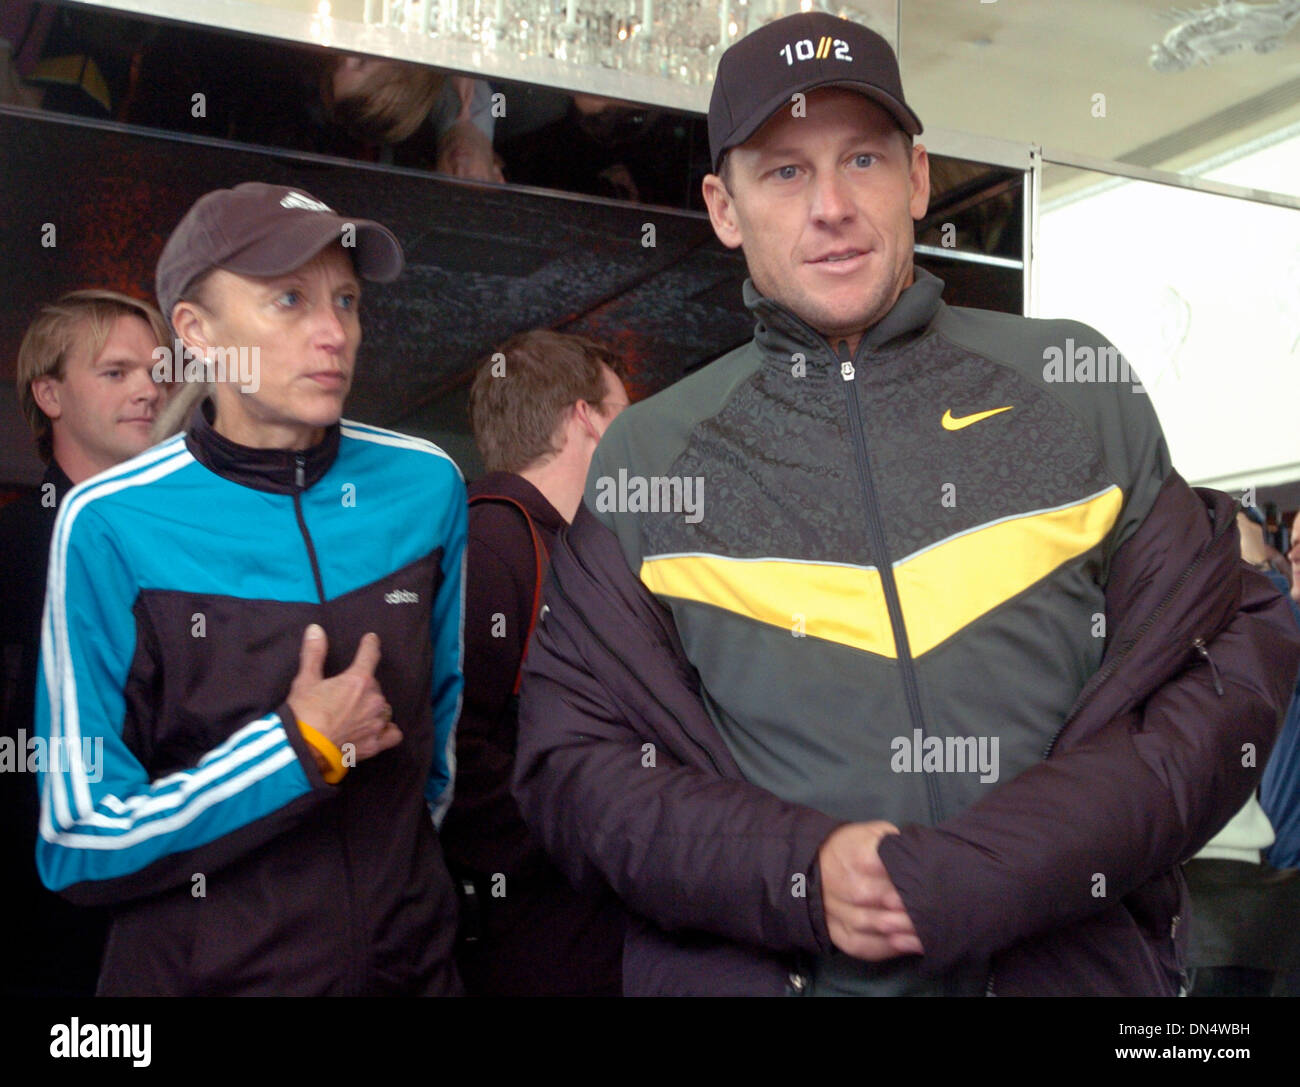 Nov 03, 2006; MANHATTAN, NY, USA; GRETE WAITZ (L), nine time New York City Marathon winner, looks on as LANCE ARMSTRONG, seven time Tour de France winner, hosts a press conference to discuss his participation in the 2006 New York City Marathon. Armstrong says he plans to run the marathon in under three hours and will be surrounded by former marathon champions Alberto Salazar and Jo Stock Photo